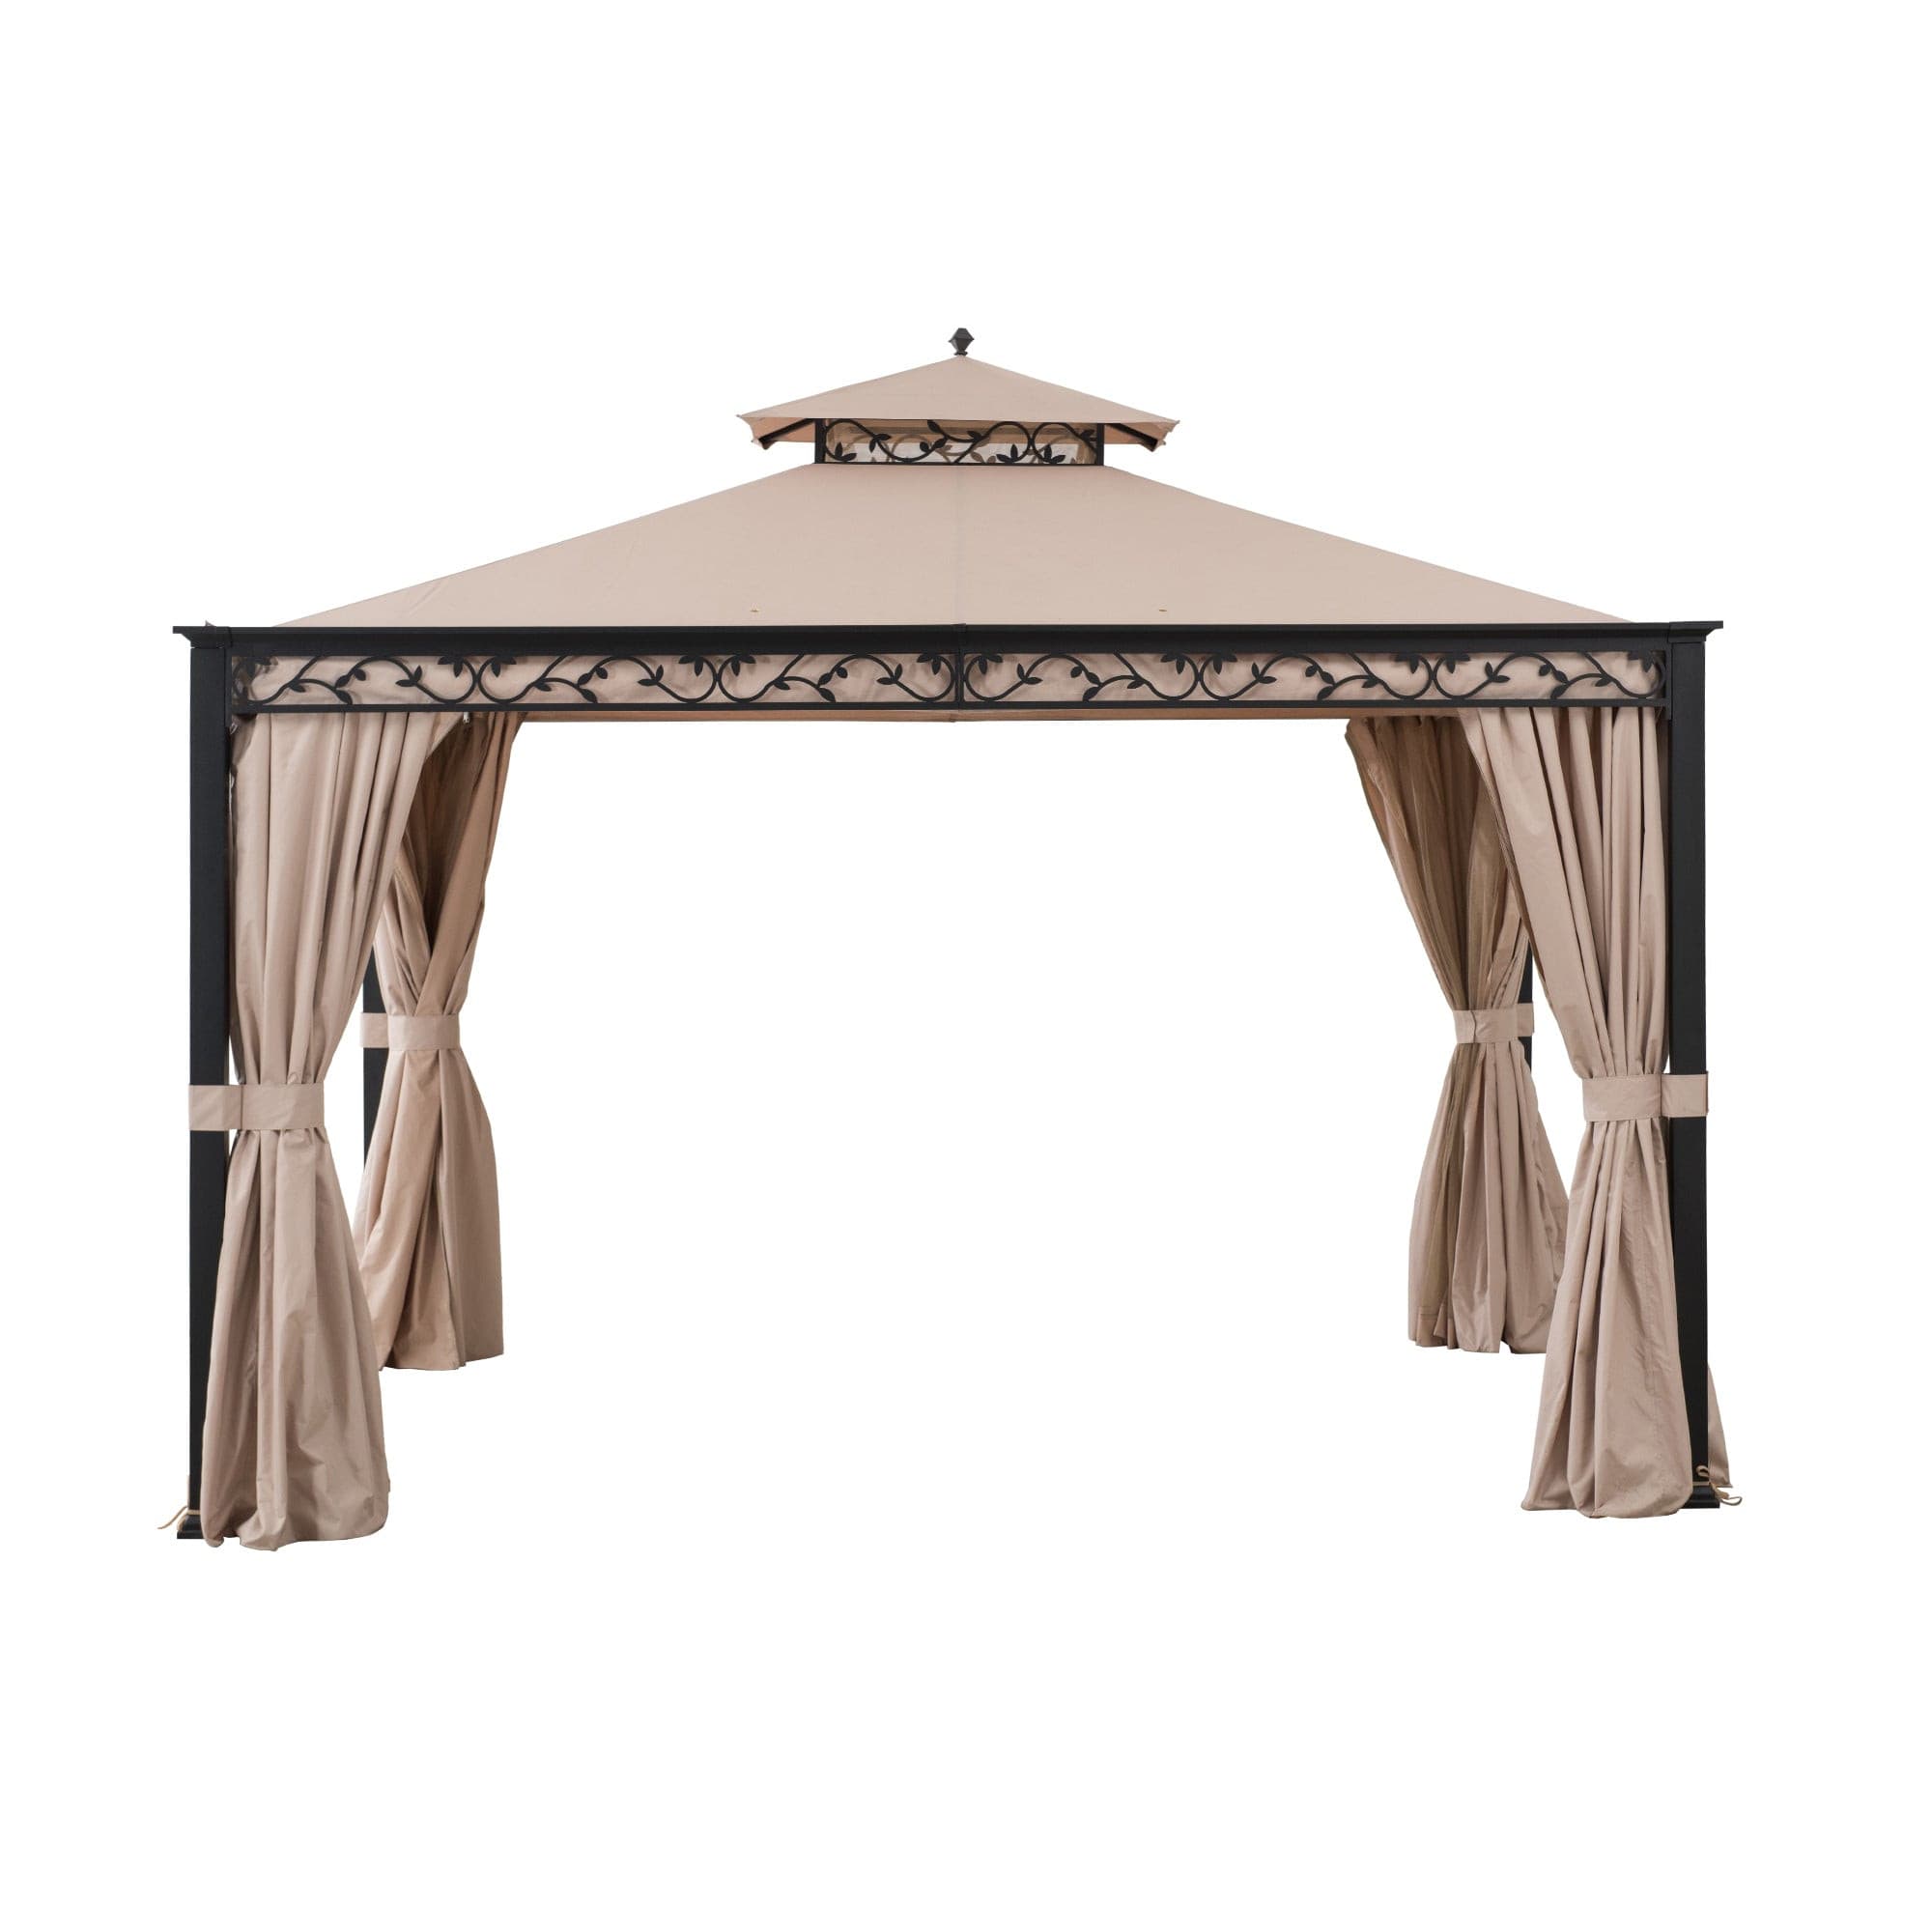 Sunjoy Khaki Replacement Curtain For Bewkes Softtop Gazebo (10X12 Ft) A101003202 Sold At SunNest